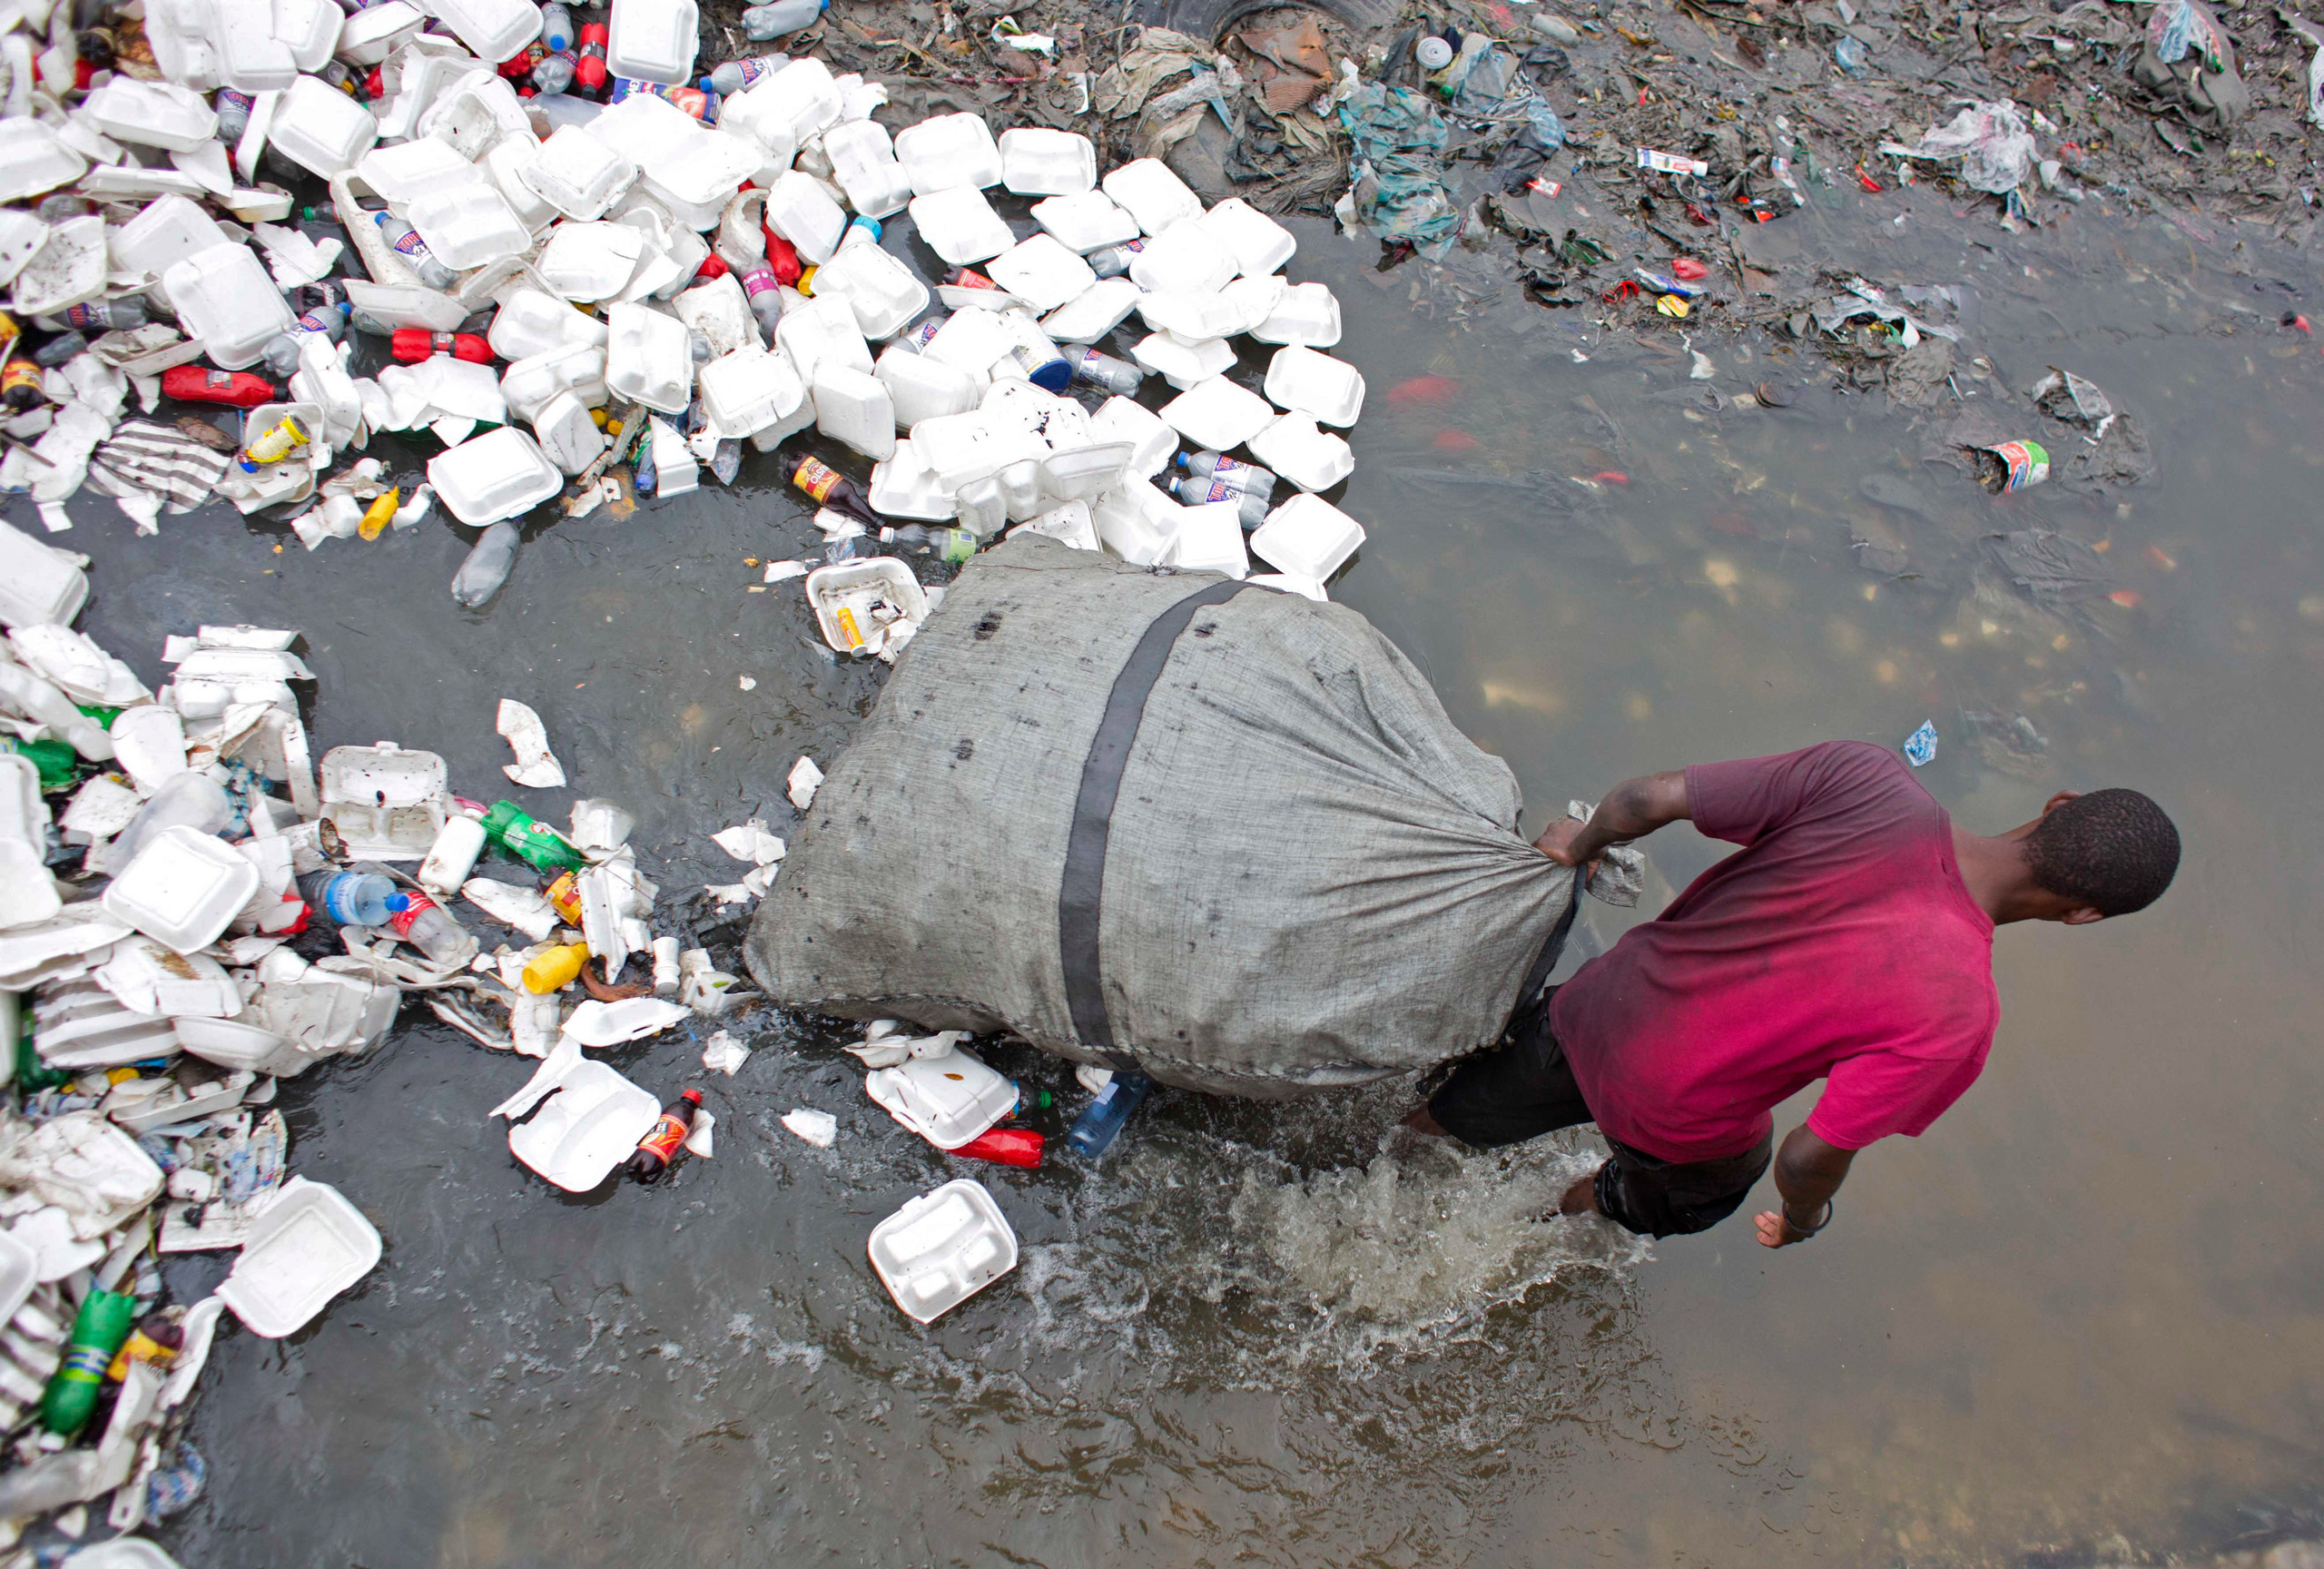 In this Feb. 28, 2016 photo, man wades through a garbage filled water canal pulling his bag after collecting empty bottles to sell, in downtown of Port-au-Prince, Haiti. Scientists believe cholera was introduced to the country's biggest river by inadequately treated sewage from a base of U.N. peacekeepers. Victims' advocates have sued the U.N. in the United States, and a federal judge ruled last year that the organization was immune from a lawsuit seeking compensation. The U.S. Court of Appeals heard arguments in March 2016 for the plaintiffs challenging U.N. immunity claims, but a decision is not expected for months. (AP Photo/Dieu Nalio Chery)